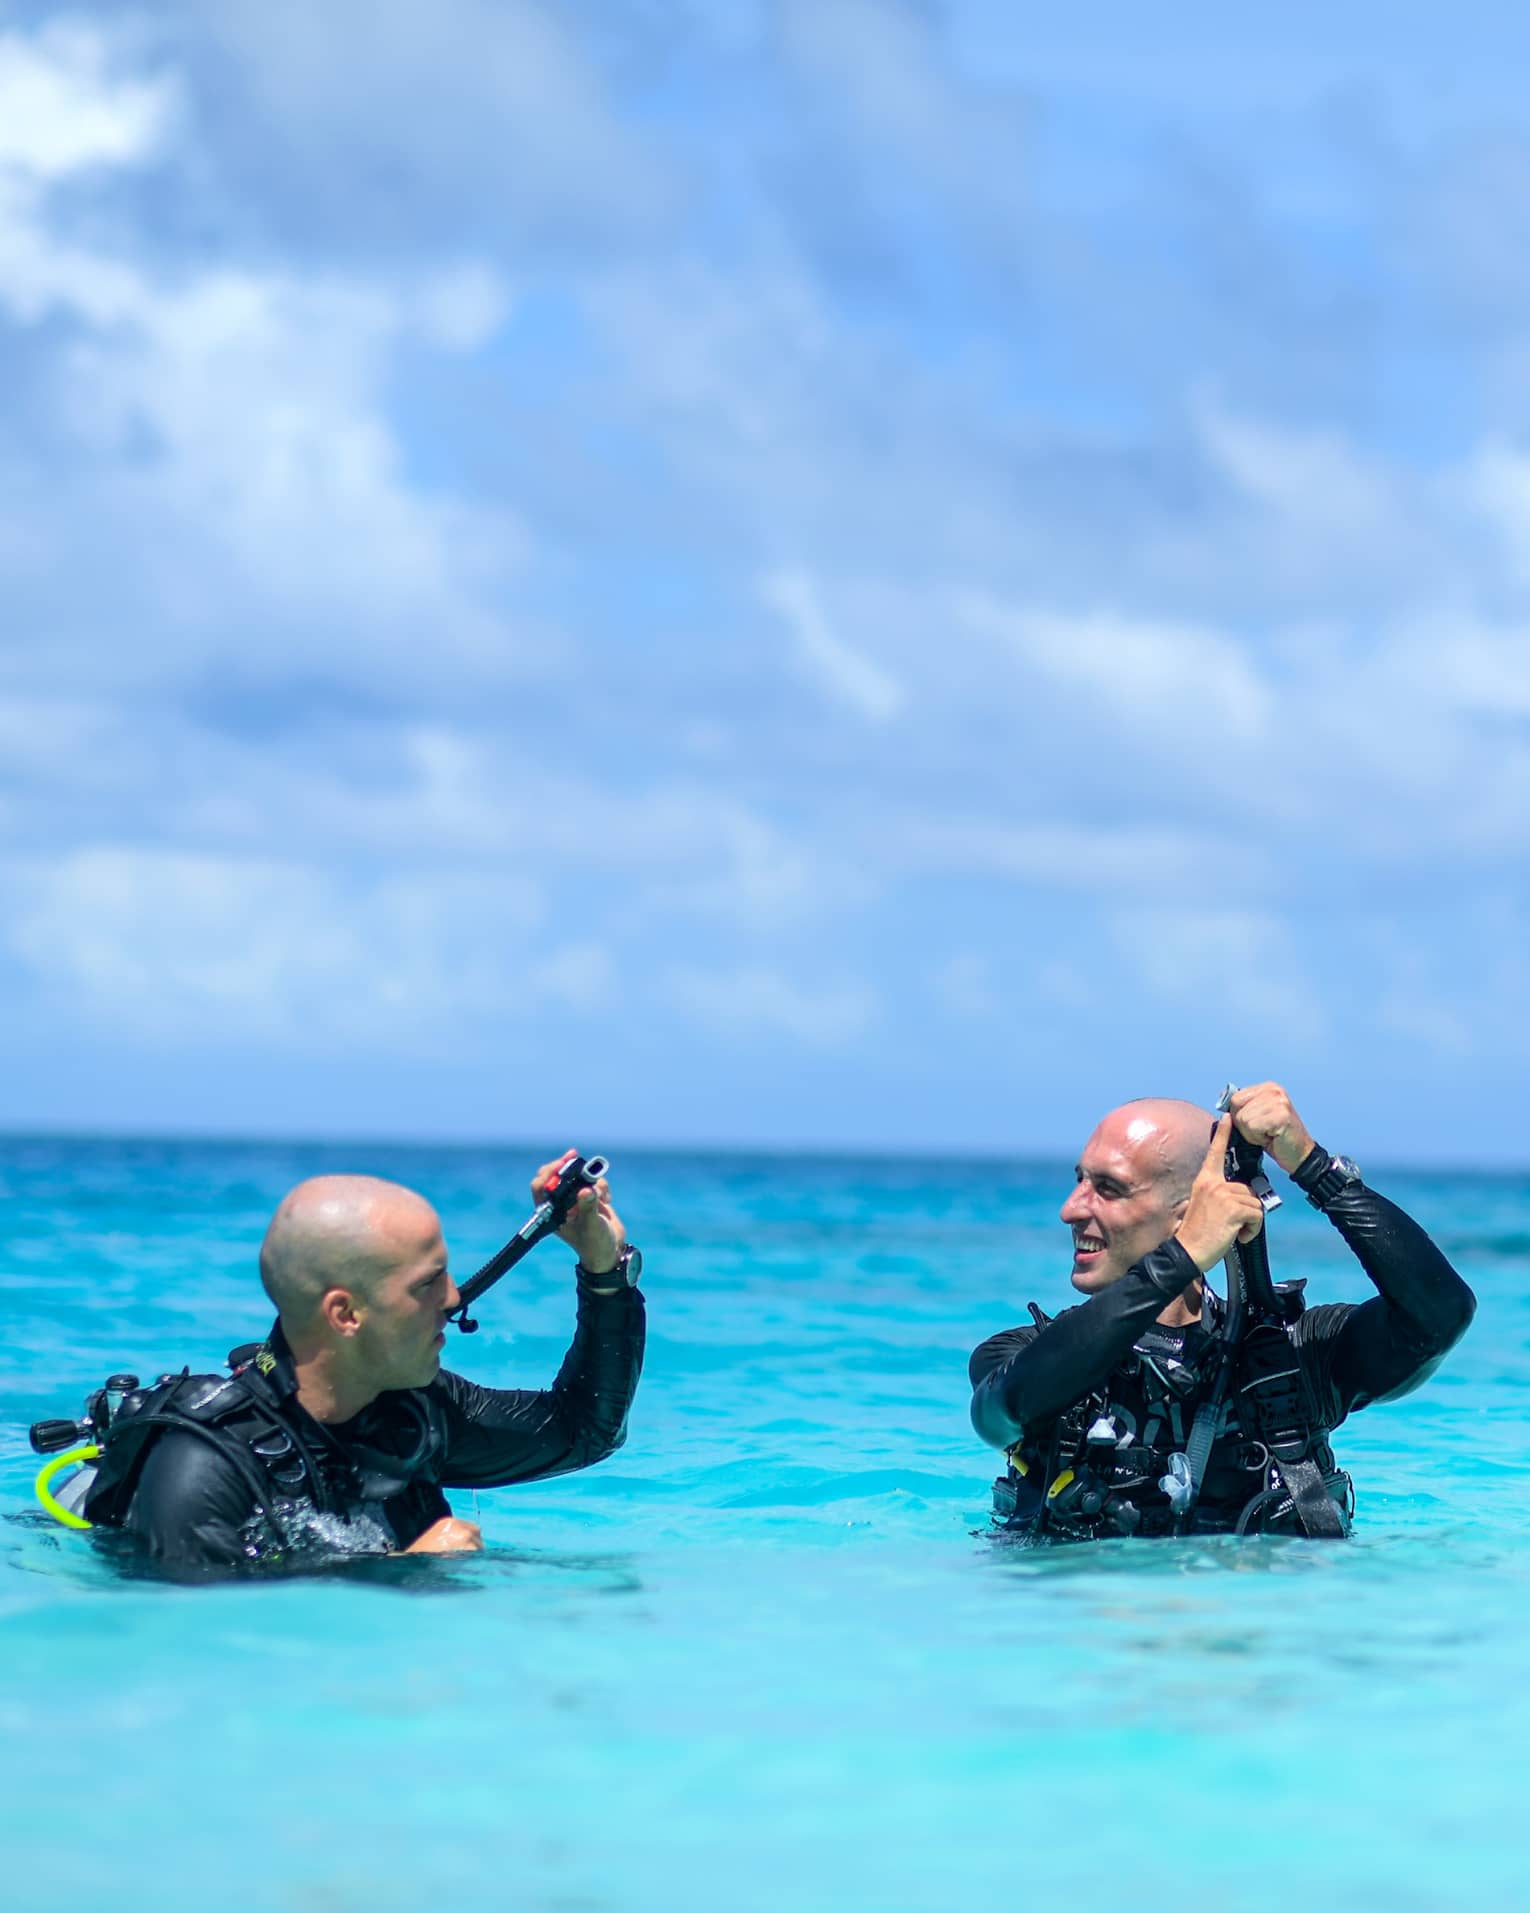 Scuba instructor showing mouthpiece to guest as they stand wearing scuba gear, chest-deep in azure water under fluffy clouds.